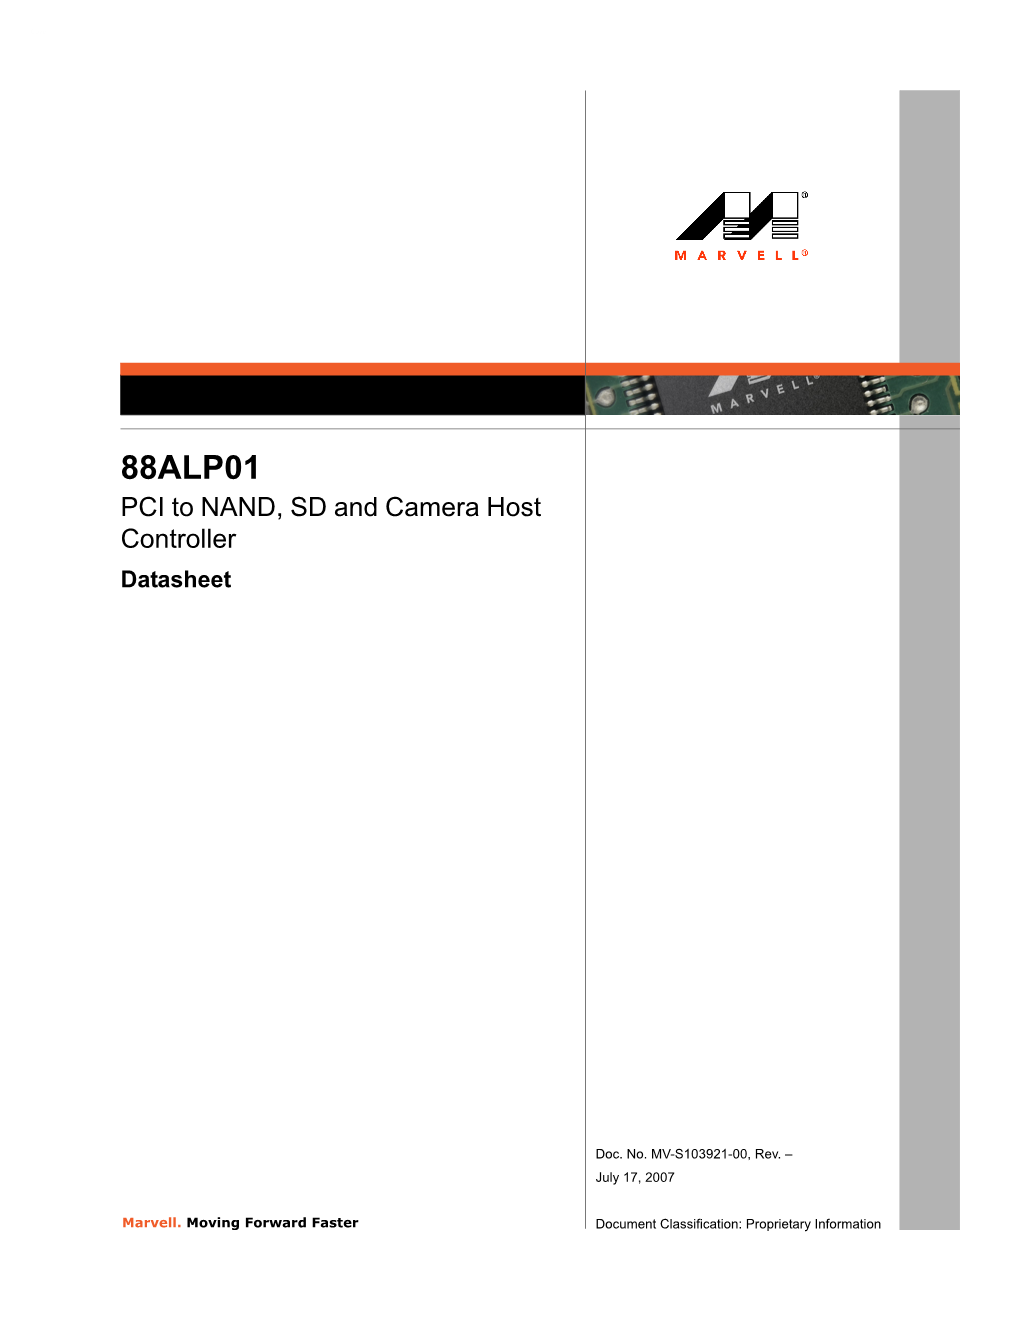 88ALP01 PCI to NAND, SD and Camera Host Controller Datasheet